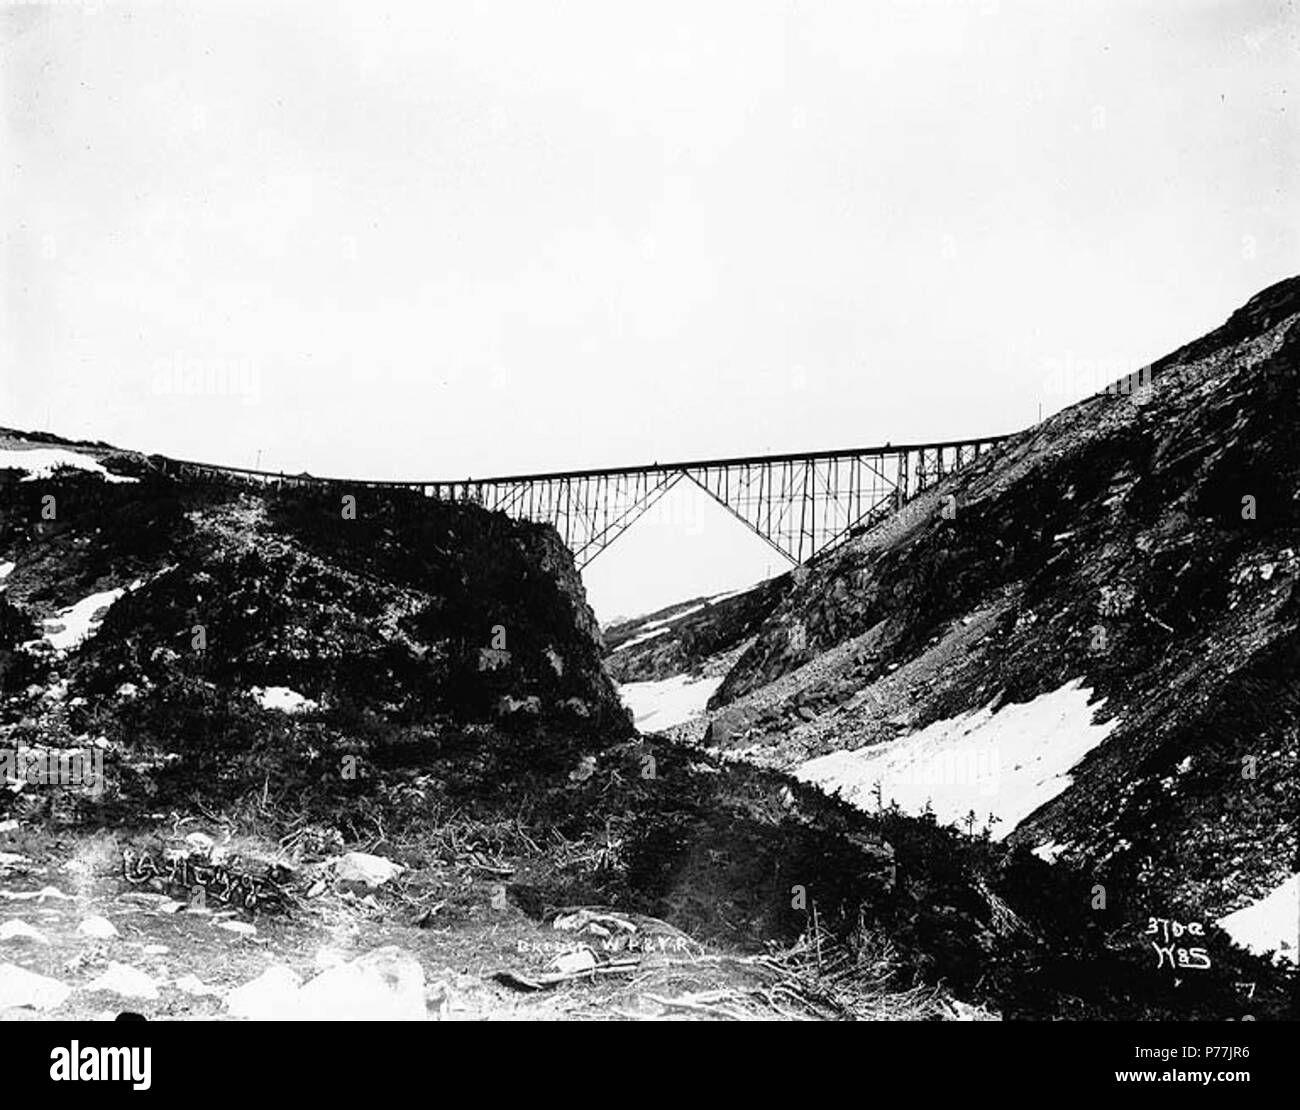 . English: Steel arch bridge spanning Dead Horse Gulch near the summit of White Pass on the White Pass and Yukon Railroad, Alaska, ca. 1901 . English: Caption on image: 'Bridge W.P. & Y.R.' Original image in Hegg Album 3, page 1 . Original photograph by Eric A. Hegg 824; copied by Webster and Stevens 370.A. Subjects (LCTGM): Railroad bridges--Alaska--Dead Horse Gulch; Canyons--Alaska Subjects (LCSH): White Pass & Yukon Route (Firm); Dead Horse Gulch (Alaska)  . circa 1901 12 Steel arch bridge spanning Dead Horse Gulch near the summit of White Pass on the White Pass and Yukon Railroad, Alaska,  Stock Photo